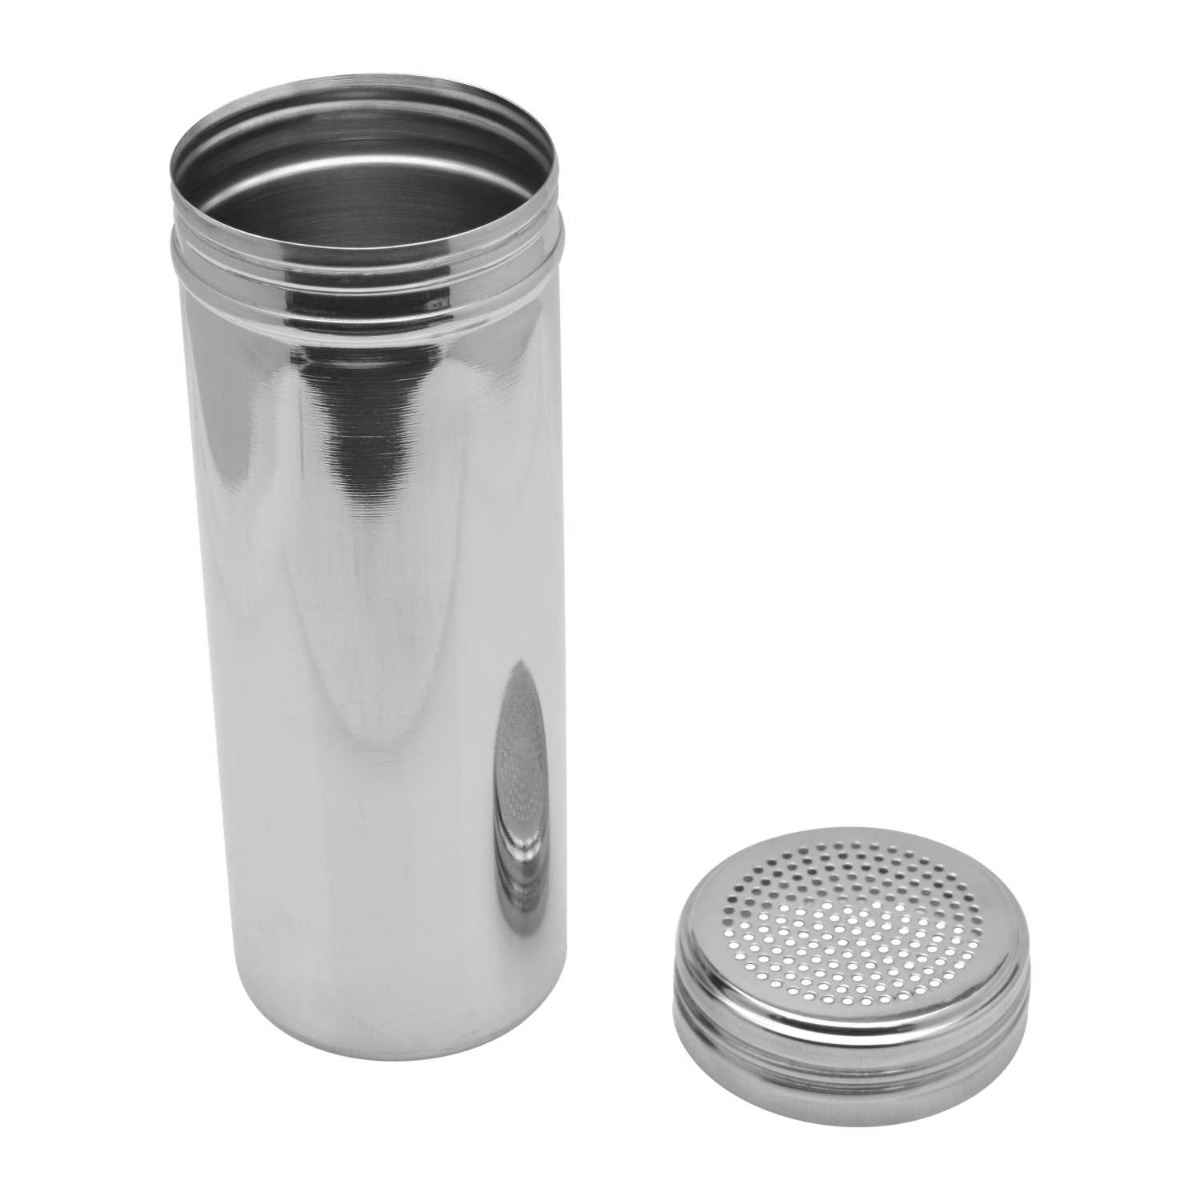 Raj Steel Spice Dispenser Without Handle